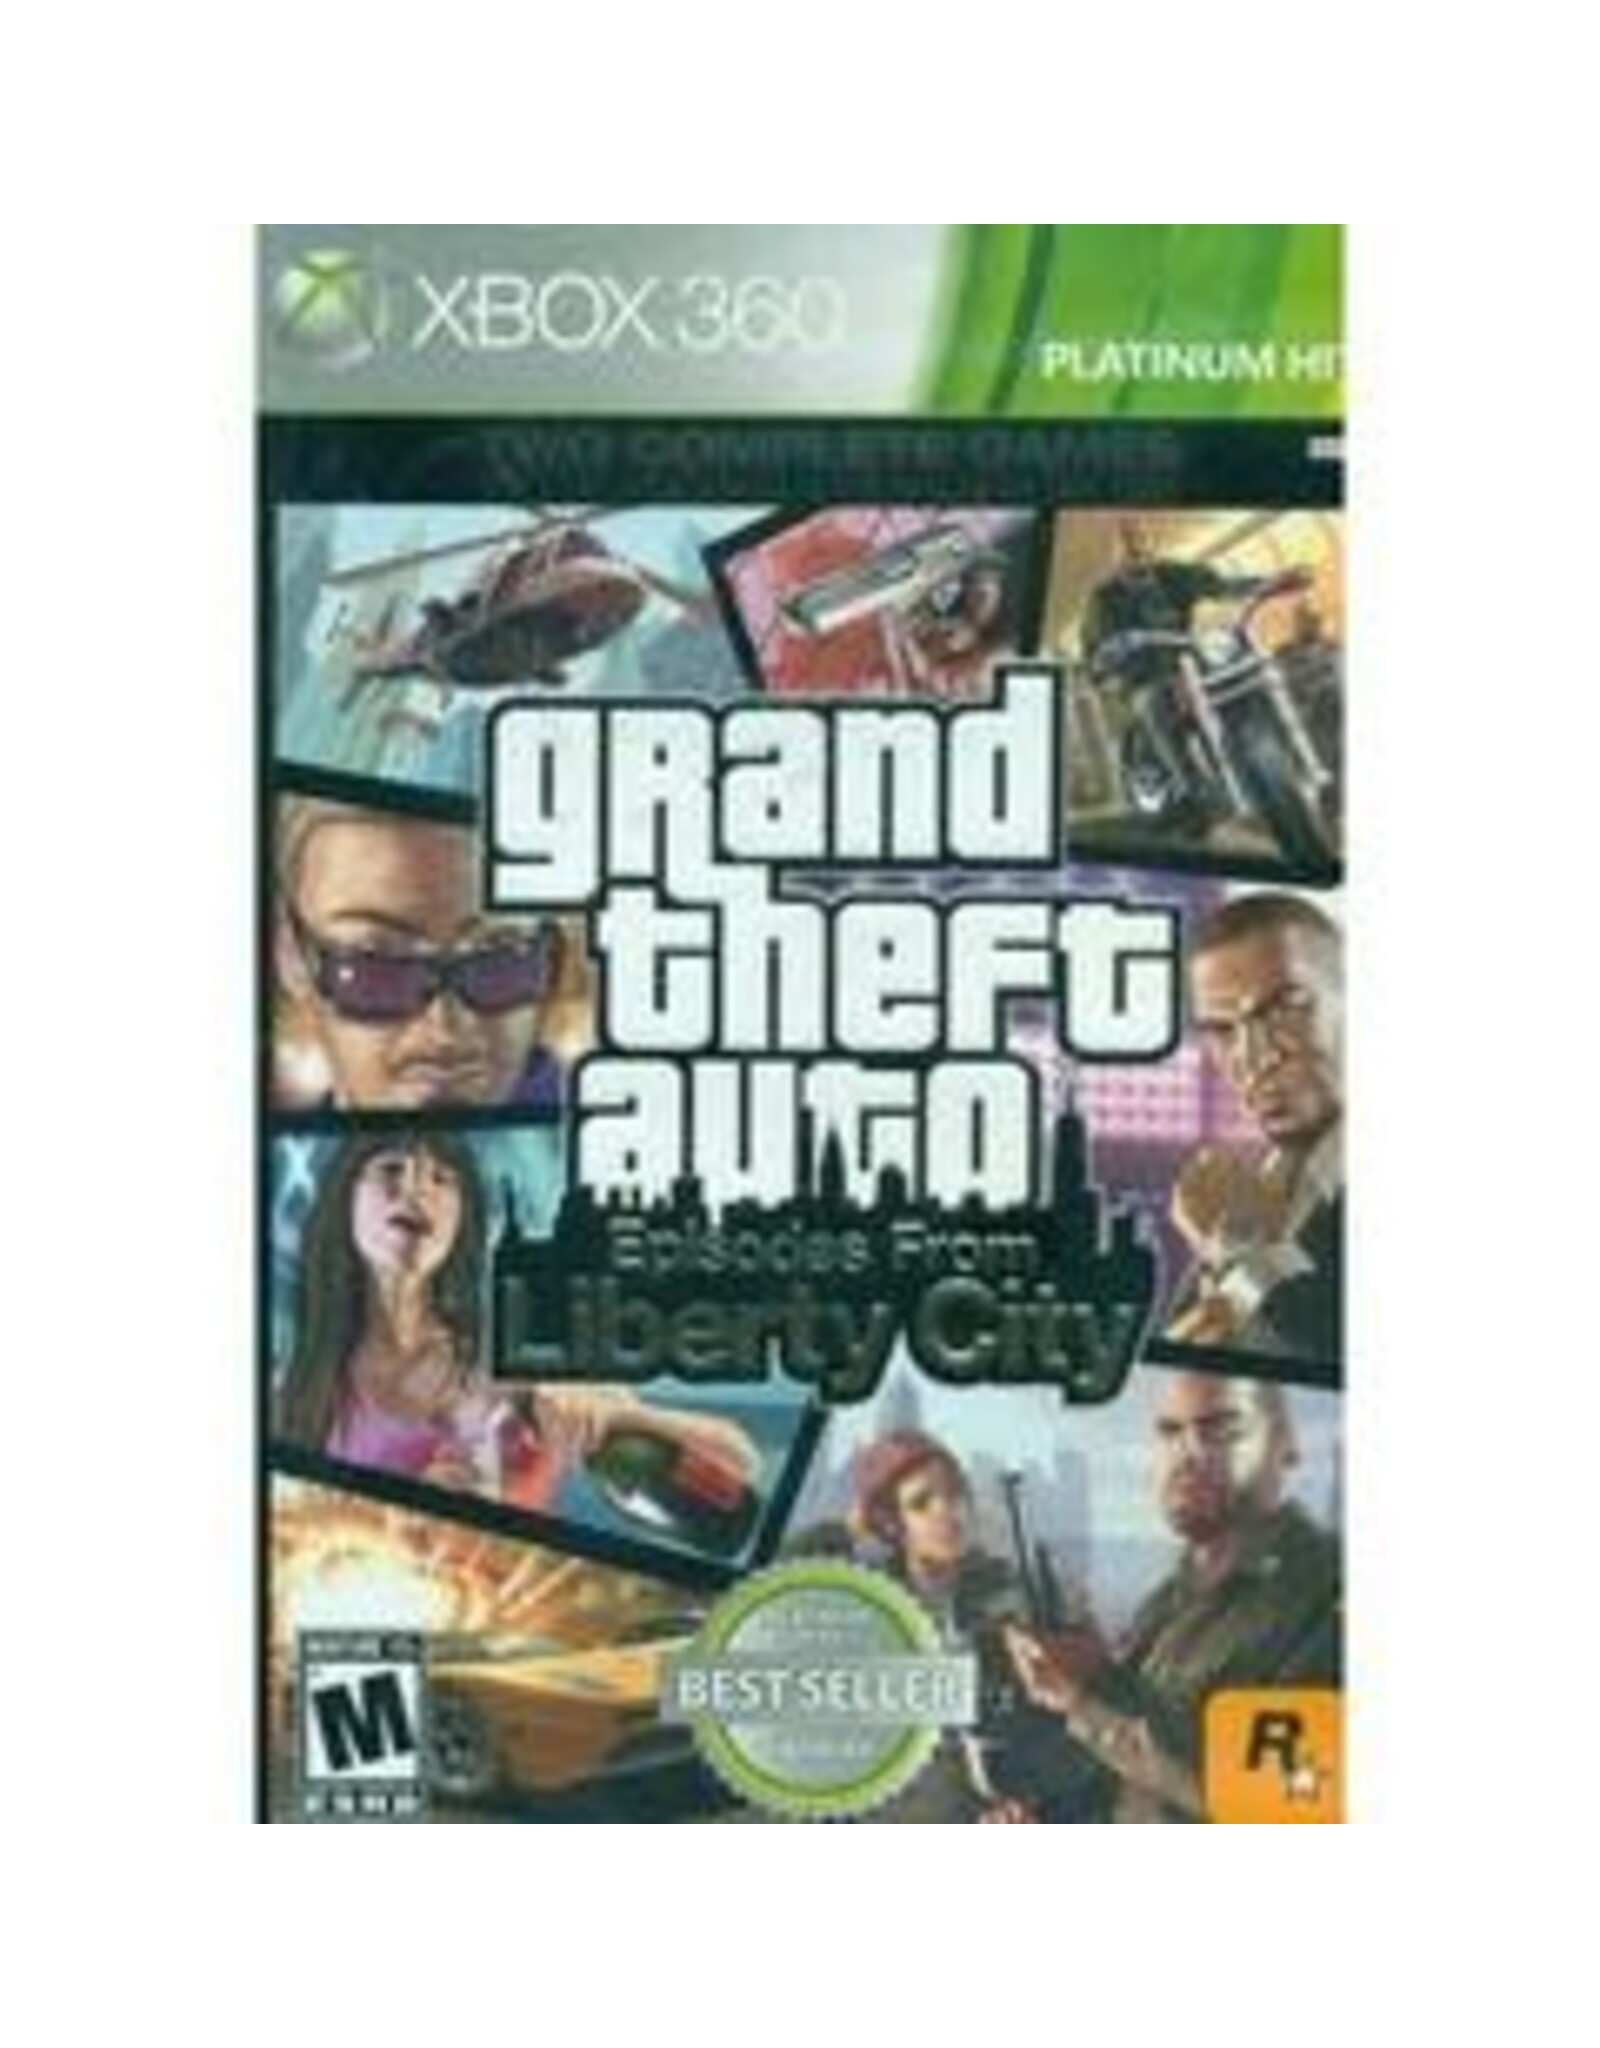 Xbox 360 Grand Theft Auto: Episodes from Liberty City - Platinum Hits (Used)